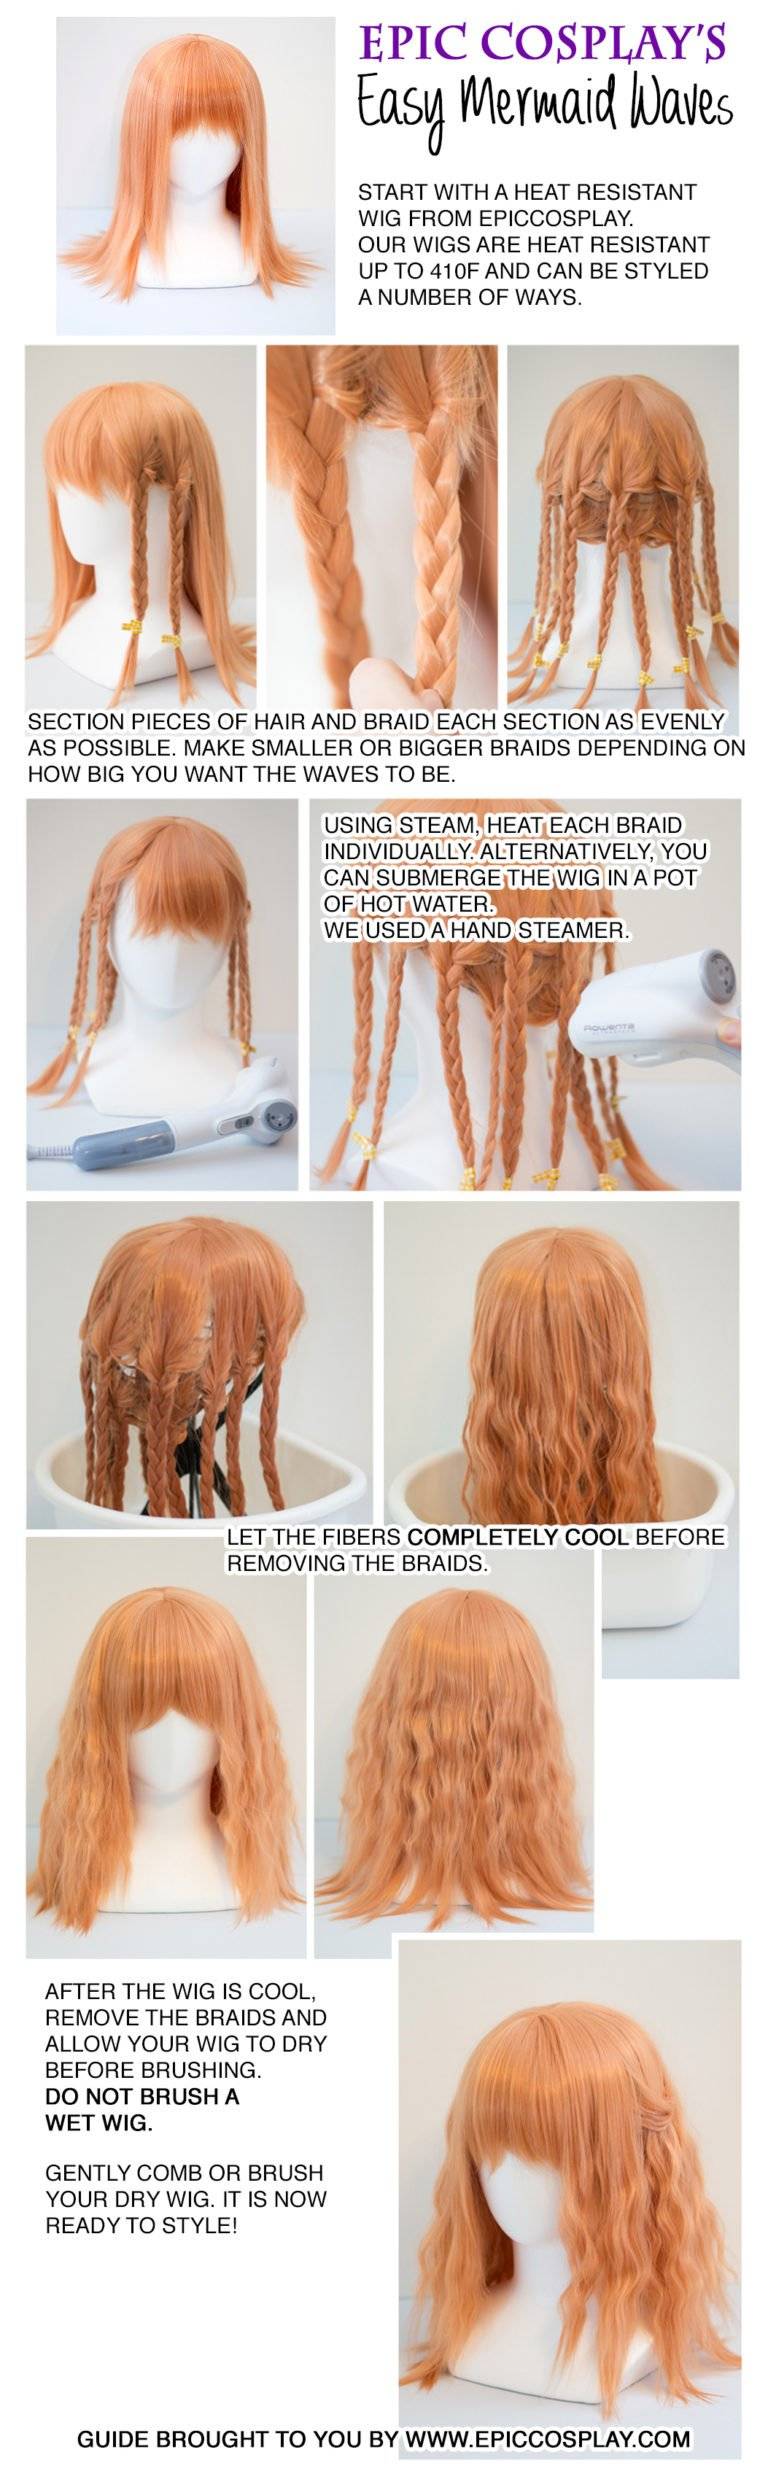 Cosplay Wig guide: Tips and tricks to get the best cosplay wigs if